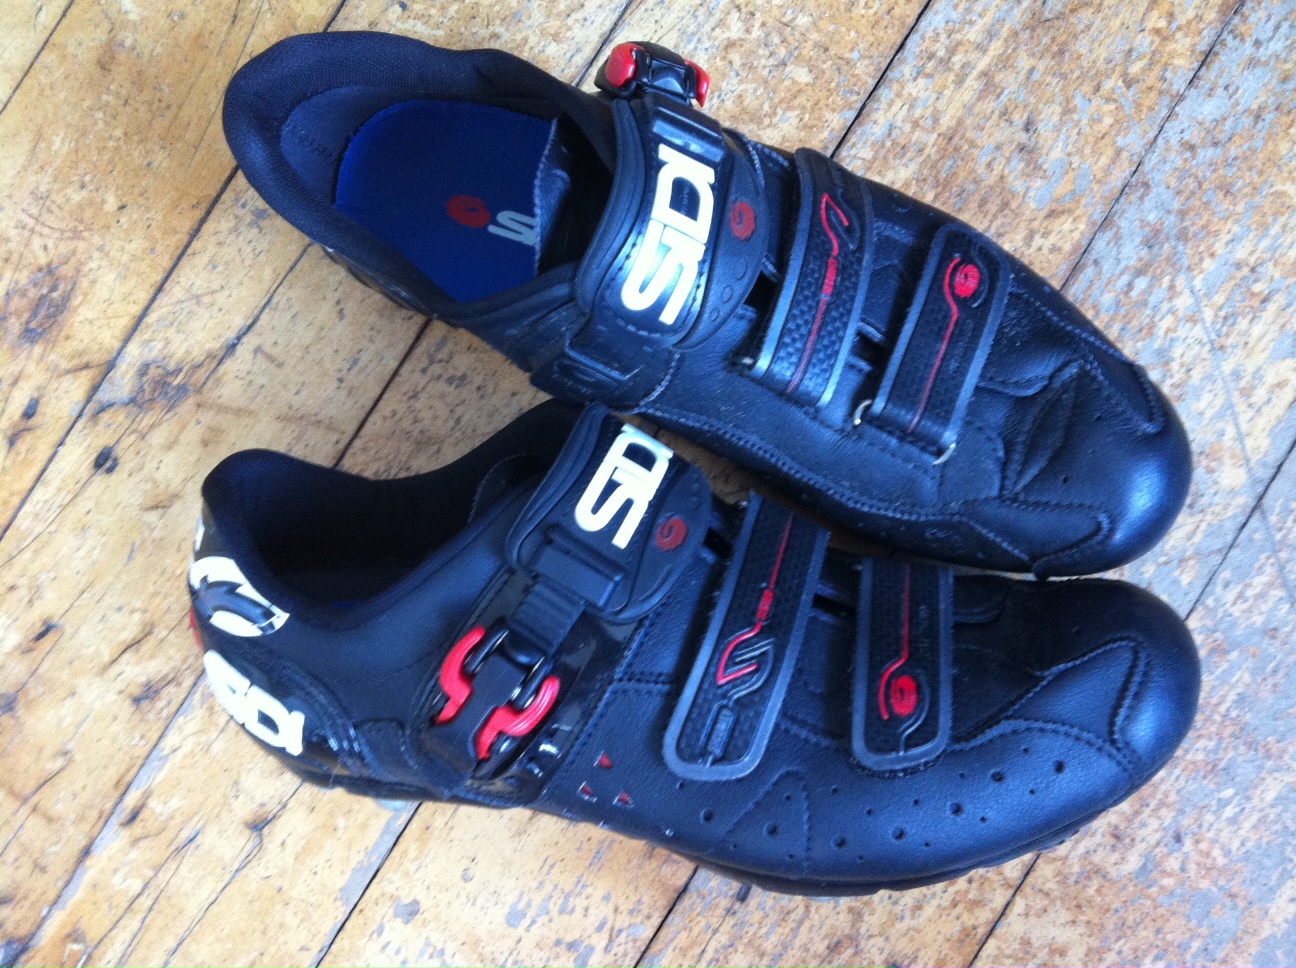 bike shoes and clips